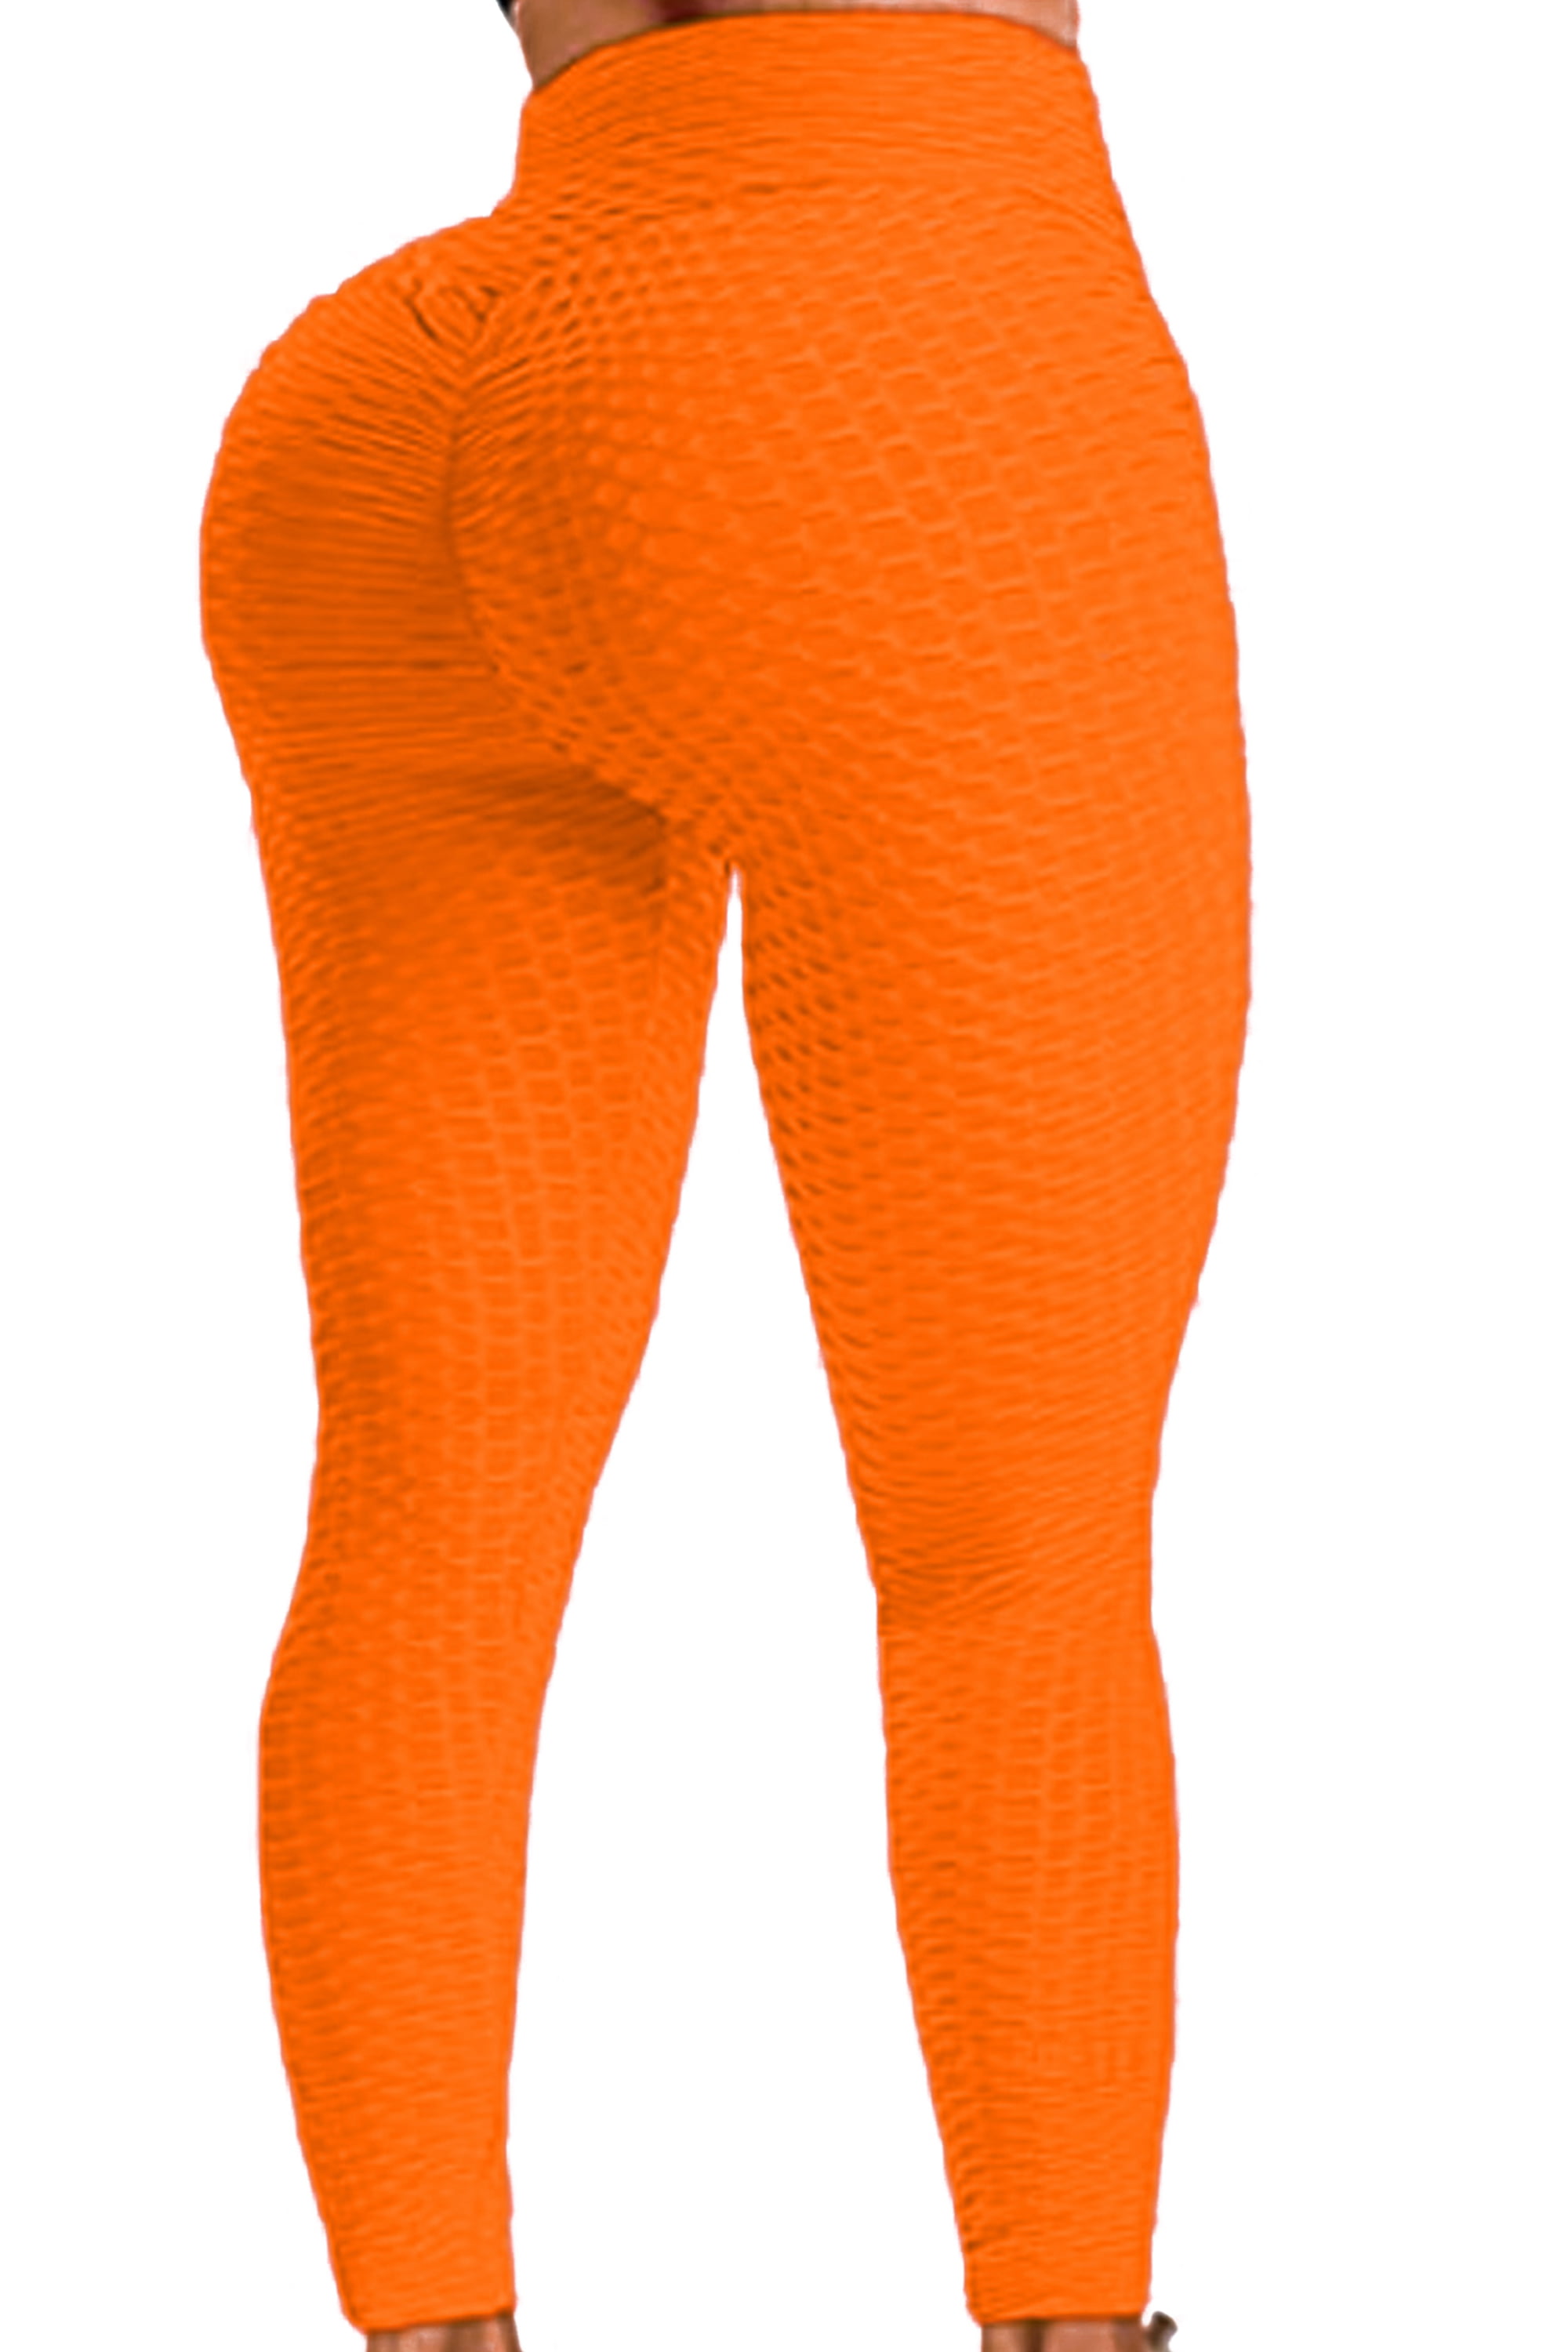 Buy DREAMOON Seamless Ribbed Leggings for Women High Waist Workout Gym  Leggings Butt Lifting Yoga Pants Booty Tights, #0 Ribbed Knit Orange, Large  at